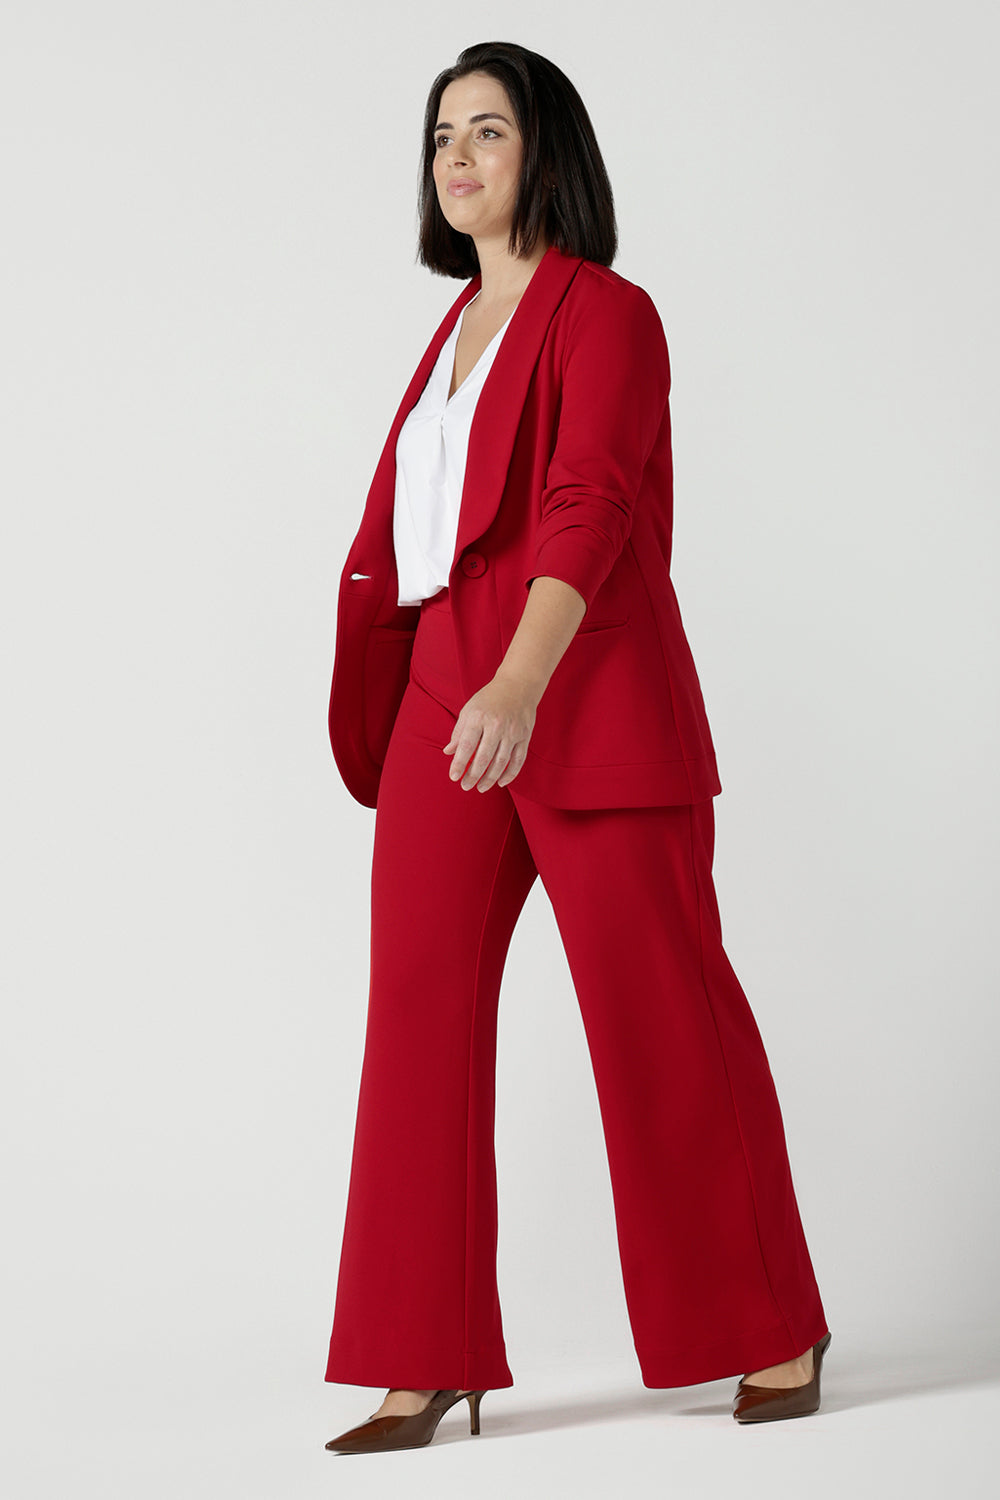 A size 10 woman wears the Merit Blazer in Flame, a textured scuba crepe blazer with button front. Curved hemline and front pockets. Made in Australia for women size 8 - 24. Stylish corporate comfortable. Styled back with matching red wide leg pants.